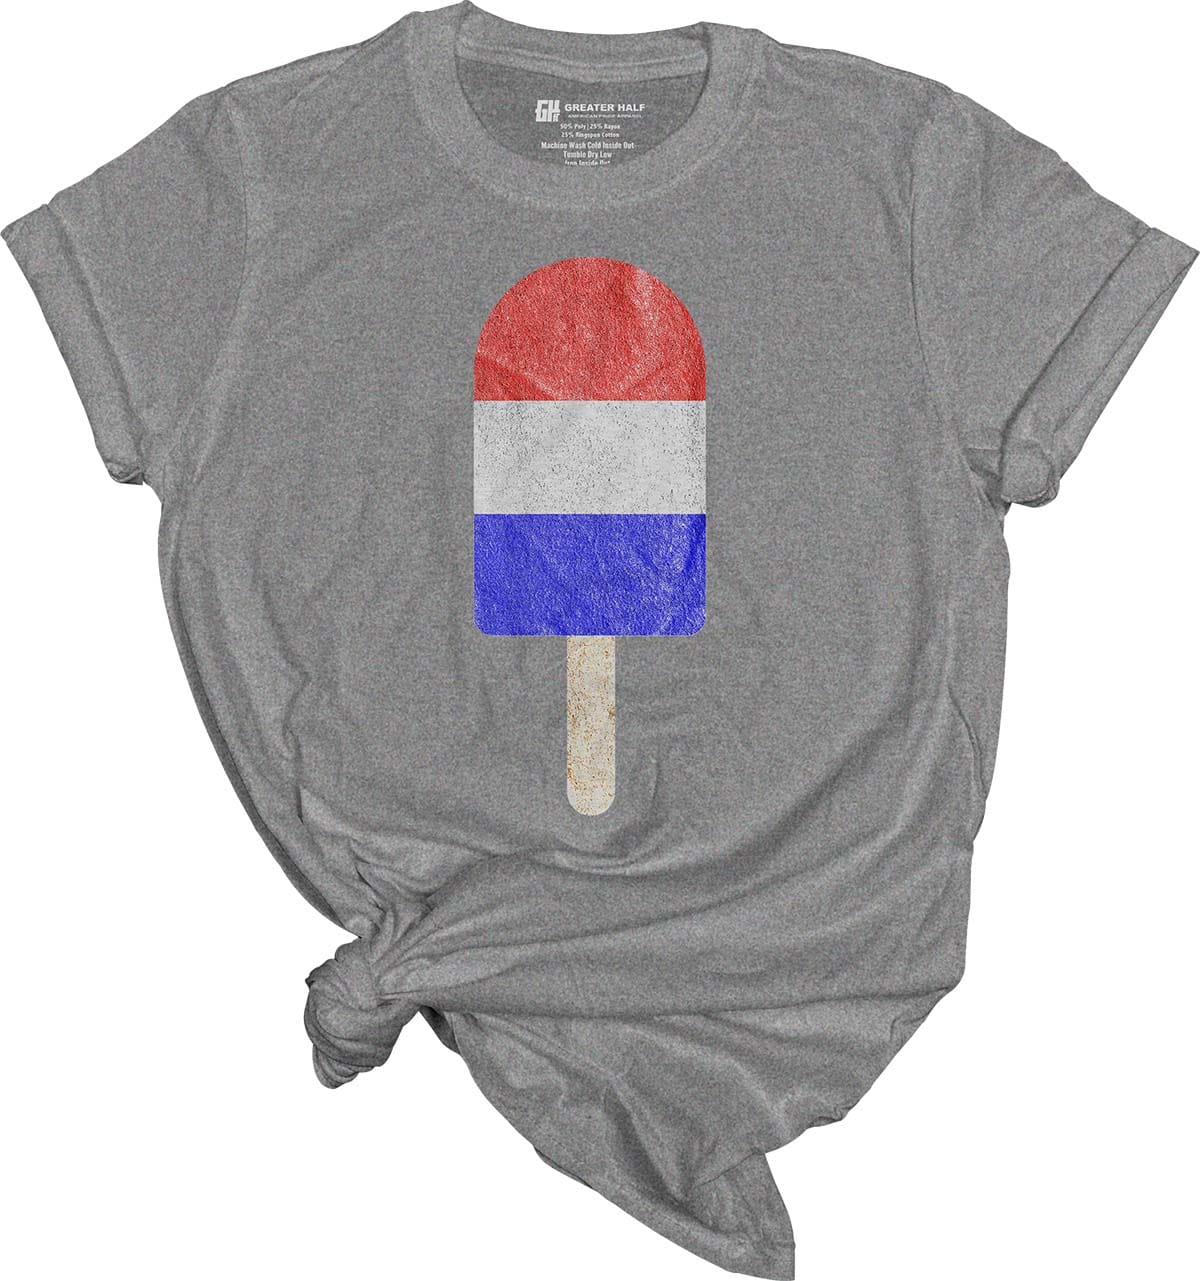 Red, White, and Blue Popsicle - Greater Half